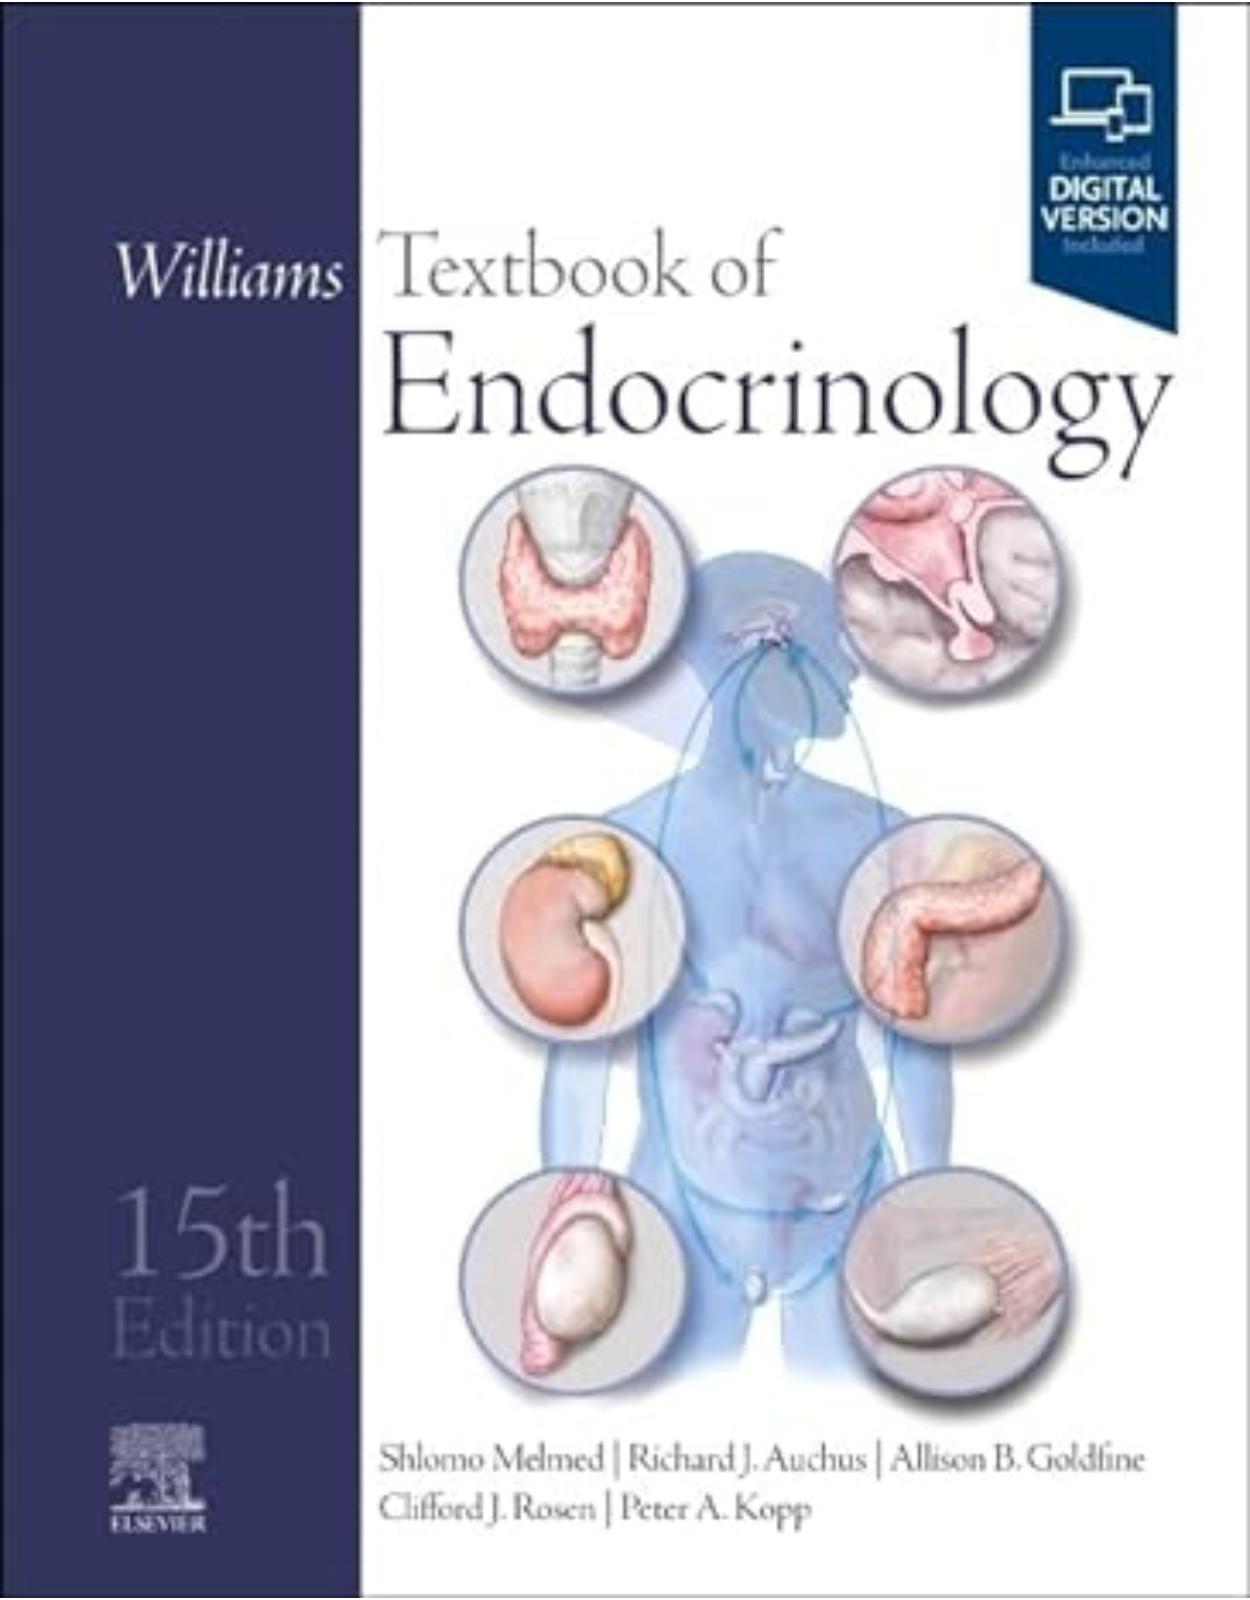 Williams Textbook of Endocrinology, 15th Edition